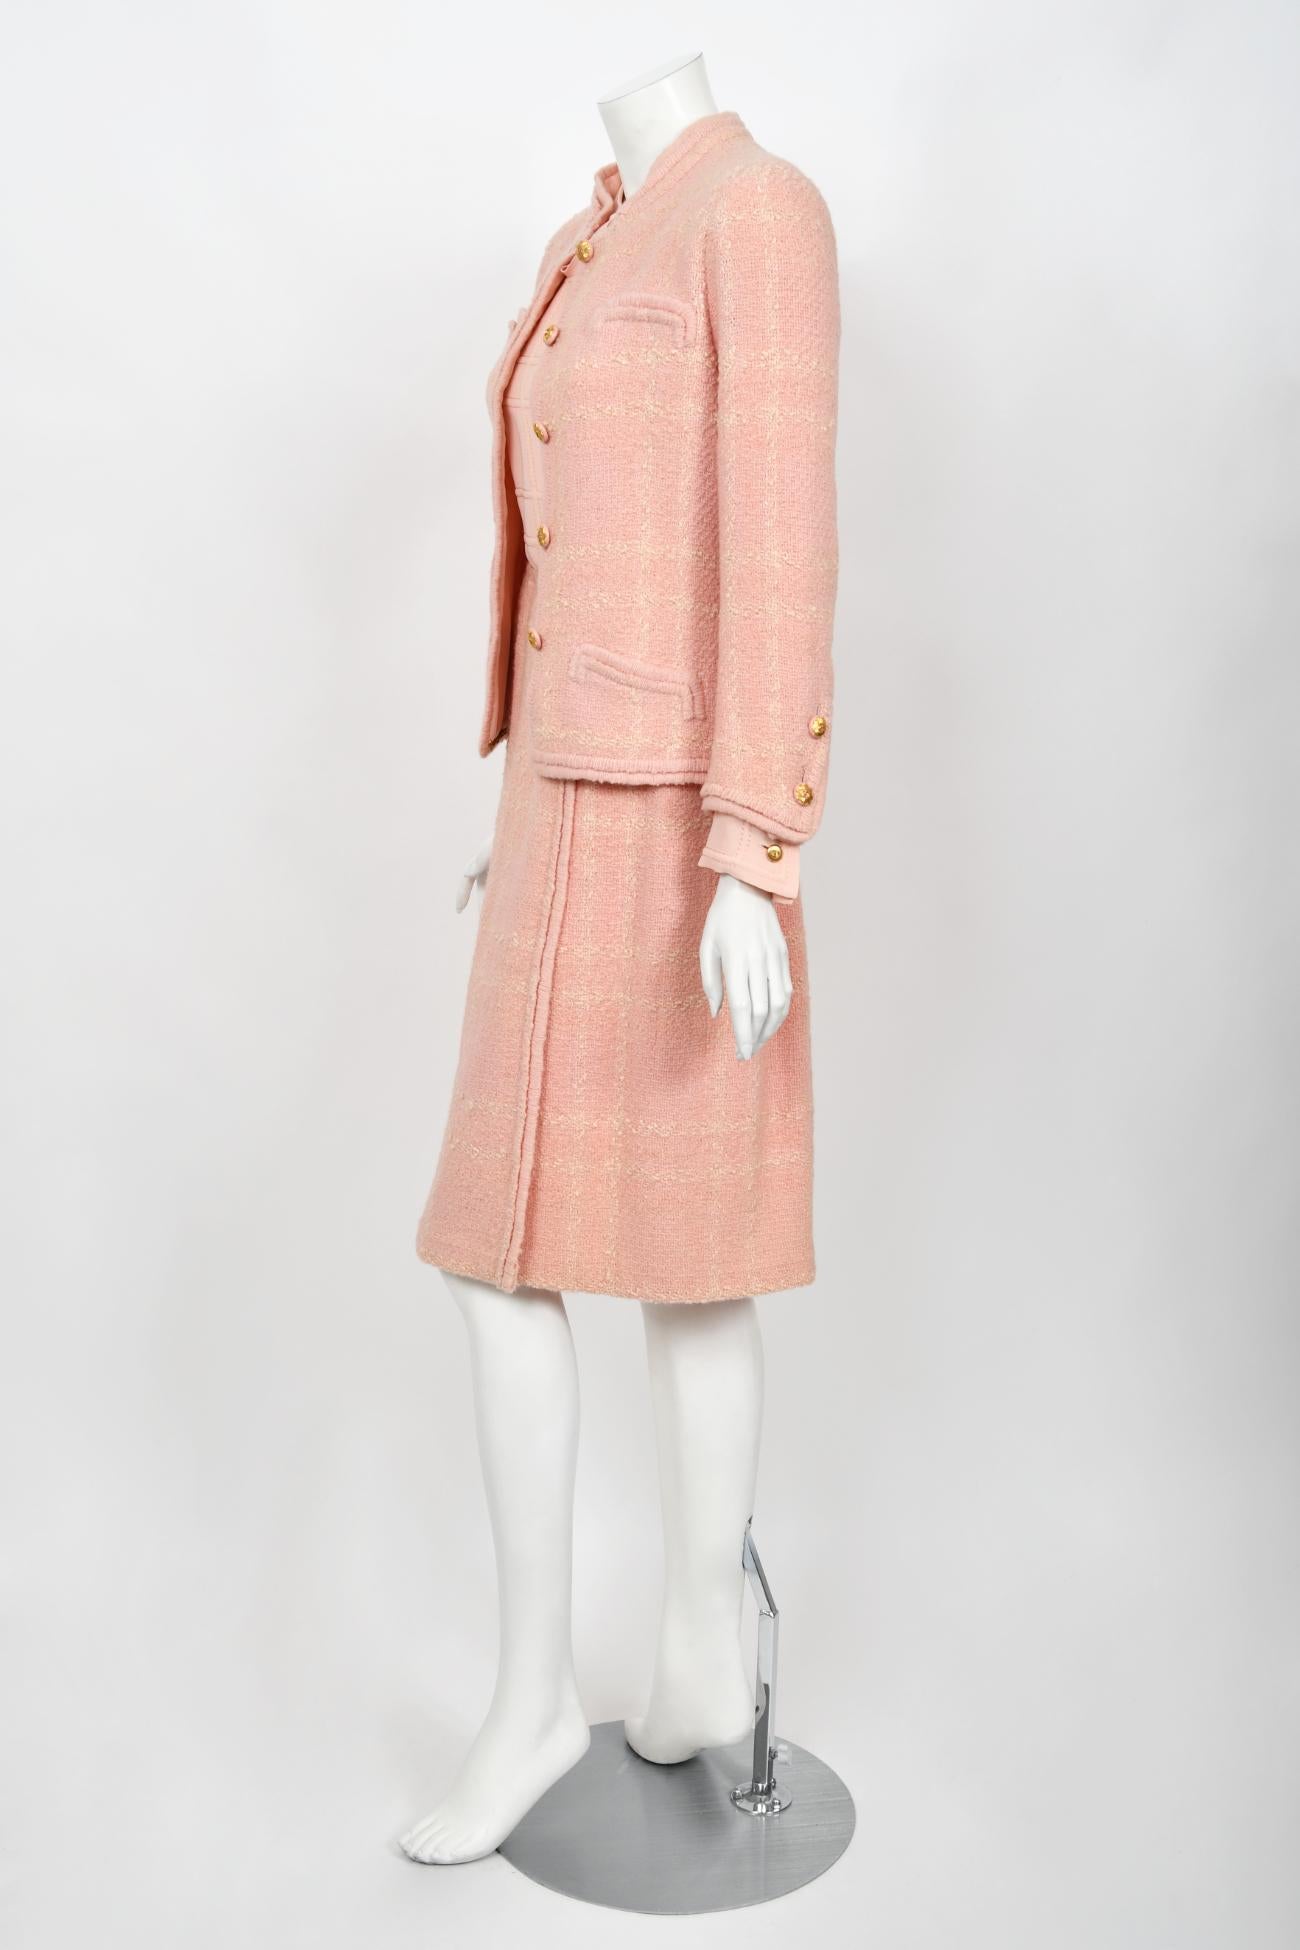 Vintage 1973 Chanel Haute Couture Documented Pink Wool Jacket Blouse Skirt Suit For Sale 2